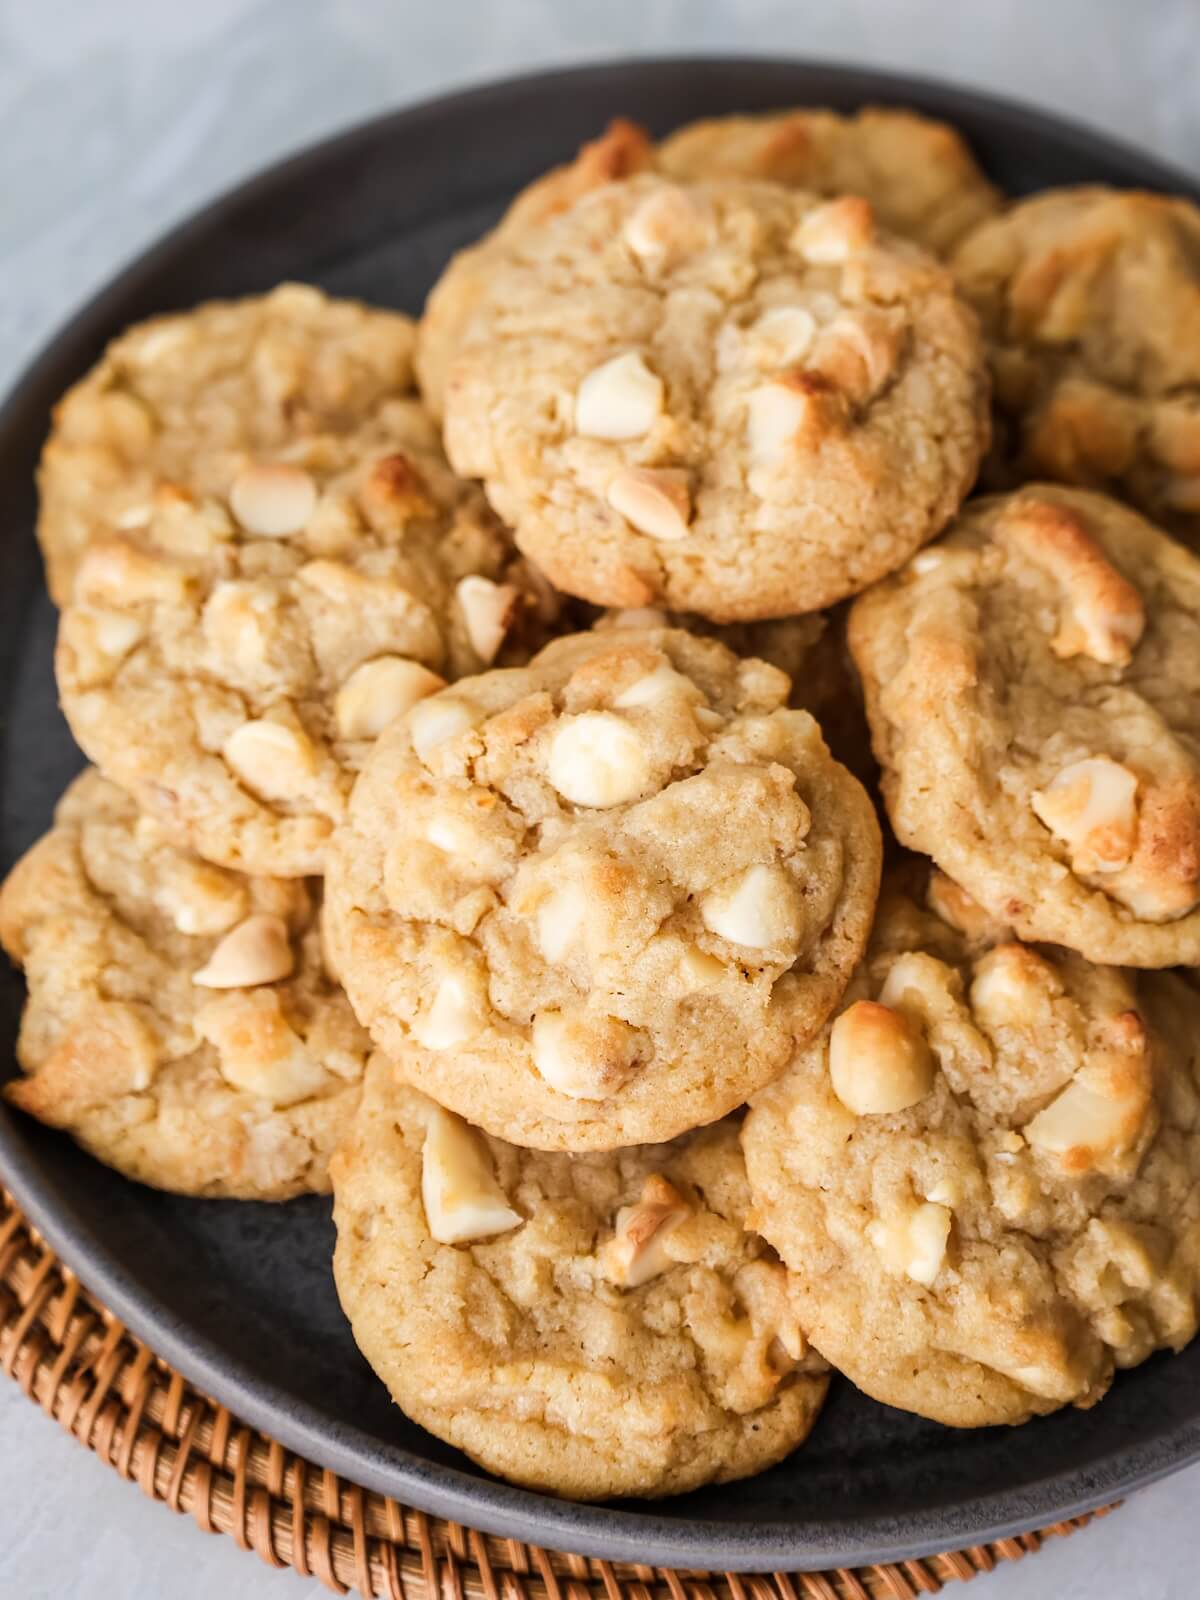 macadamia nut cookies with white chocolate stacked on a plate in a close up image.